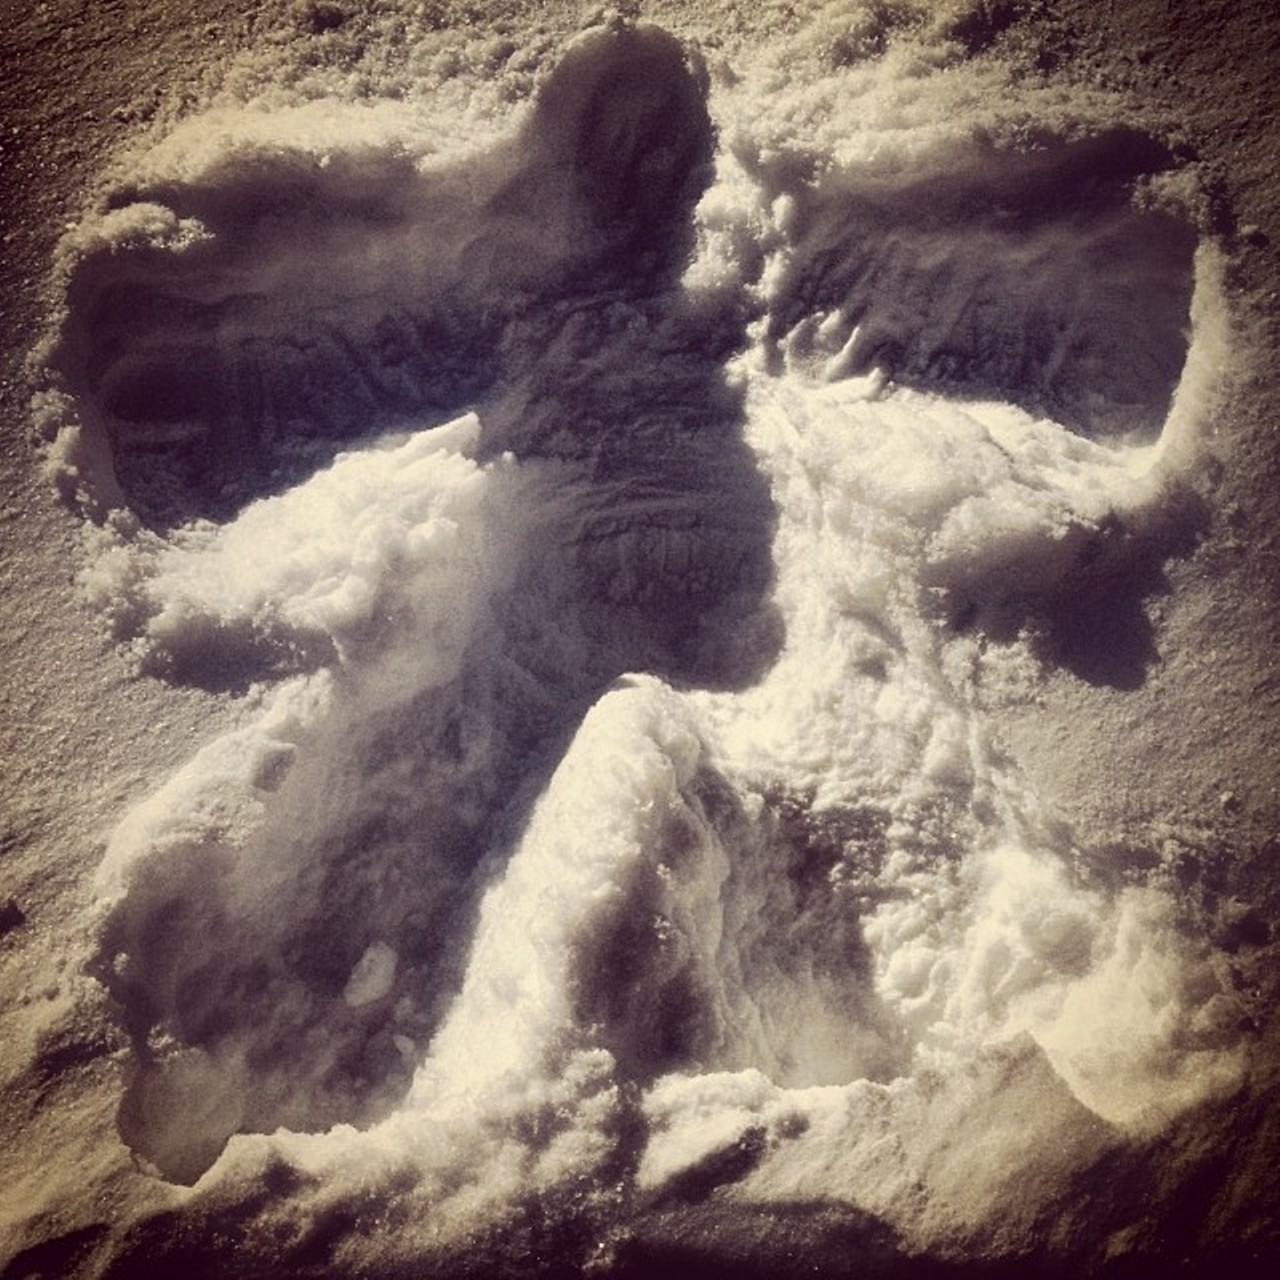 Snow angels aren't just for tots. Head on over to Public Square and try your hand at making the perfect angel. Remember not to step in your imprint when you stand up!